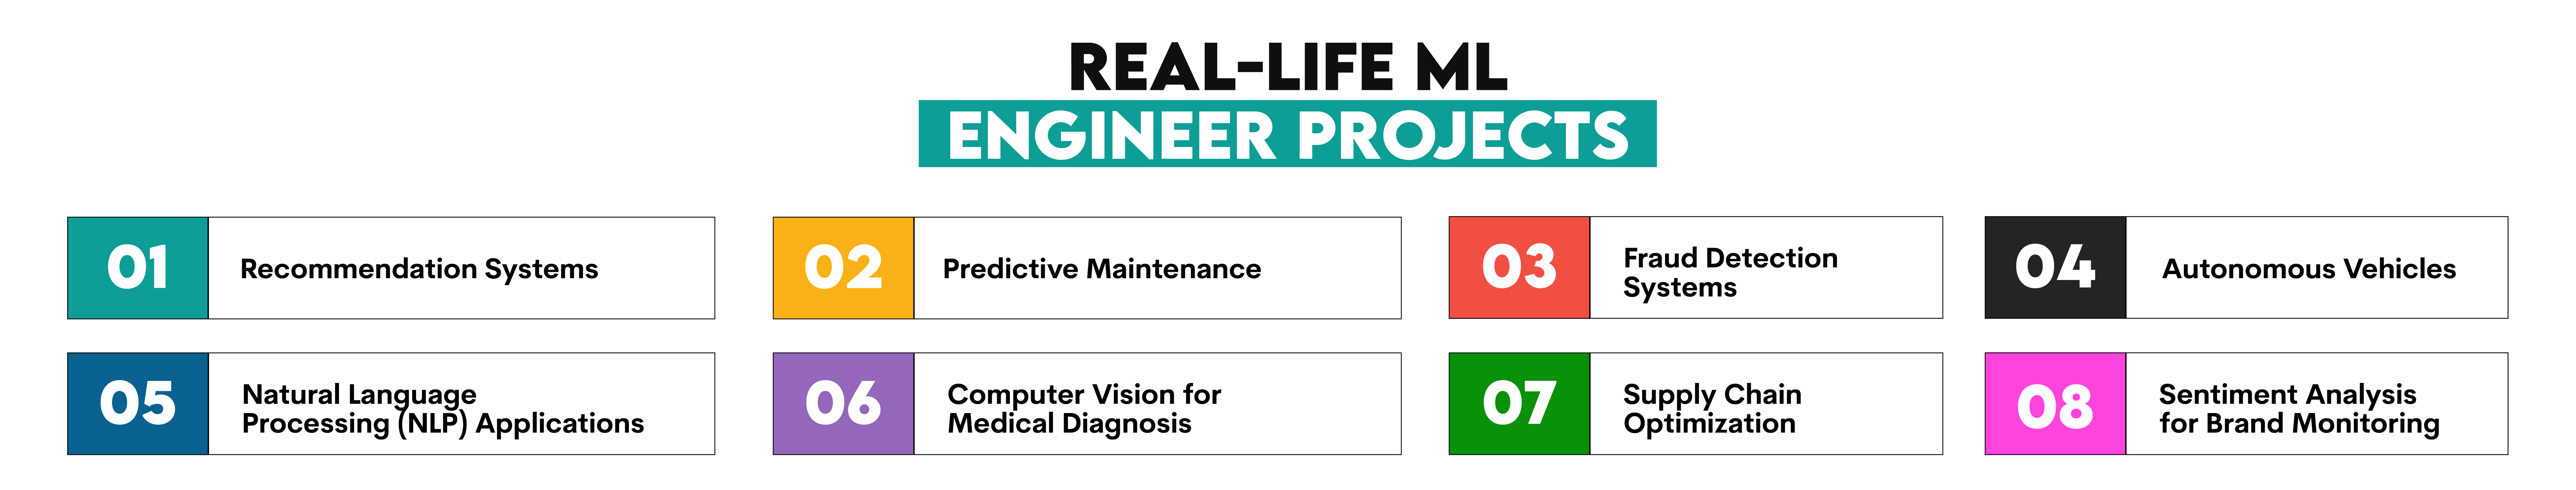 Real Life Projects Machine Learning Engineers Work On